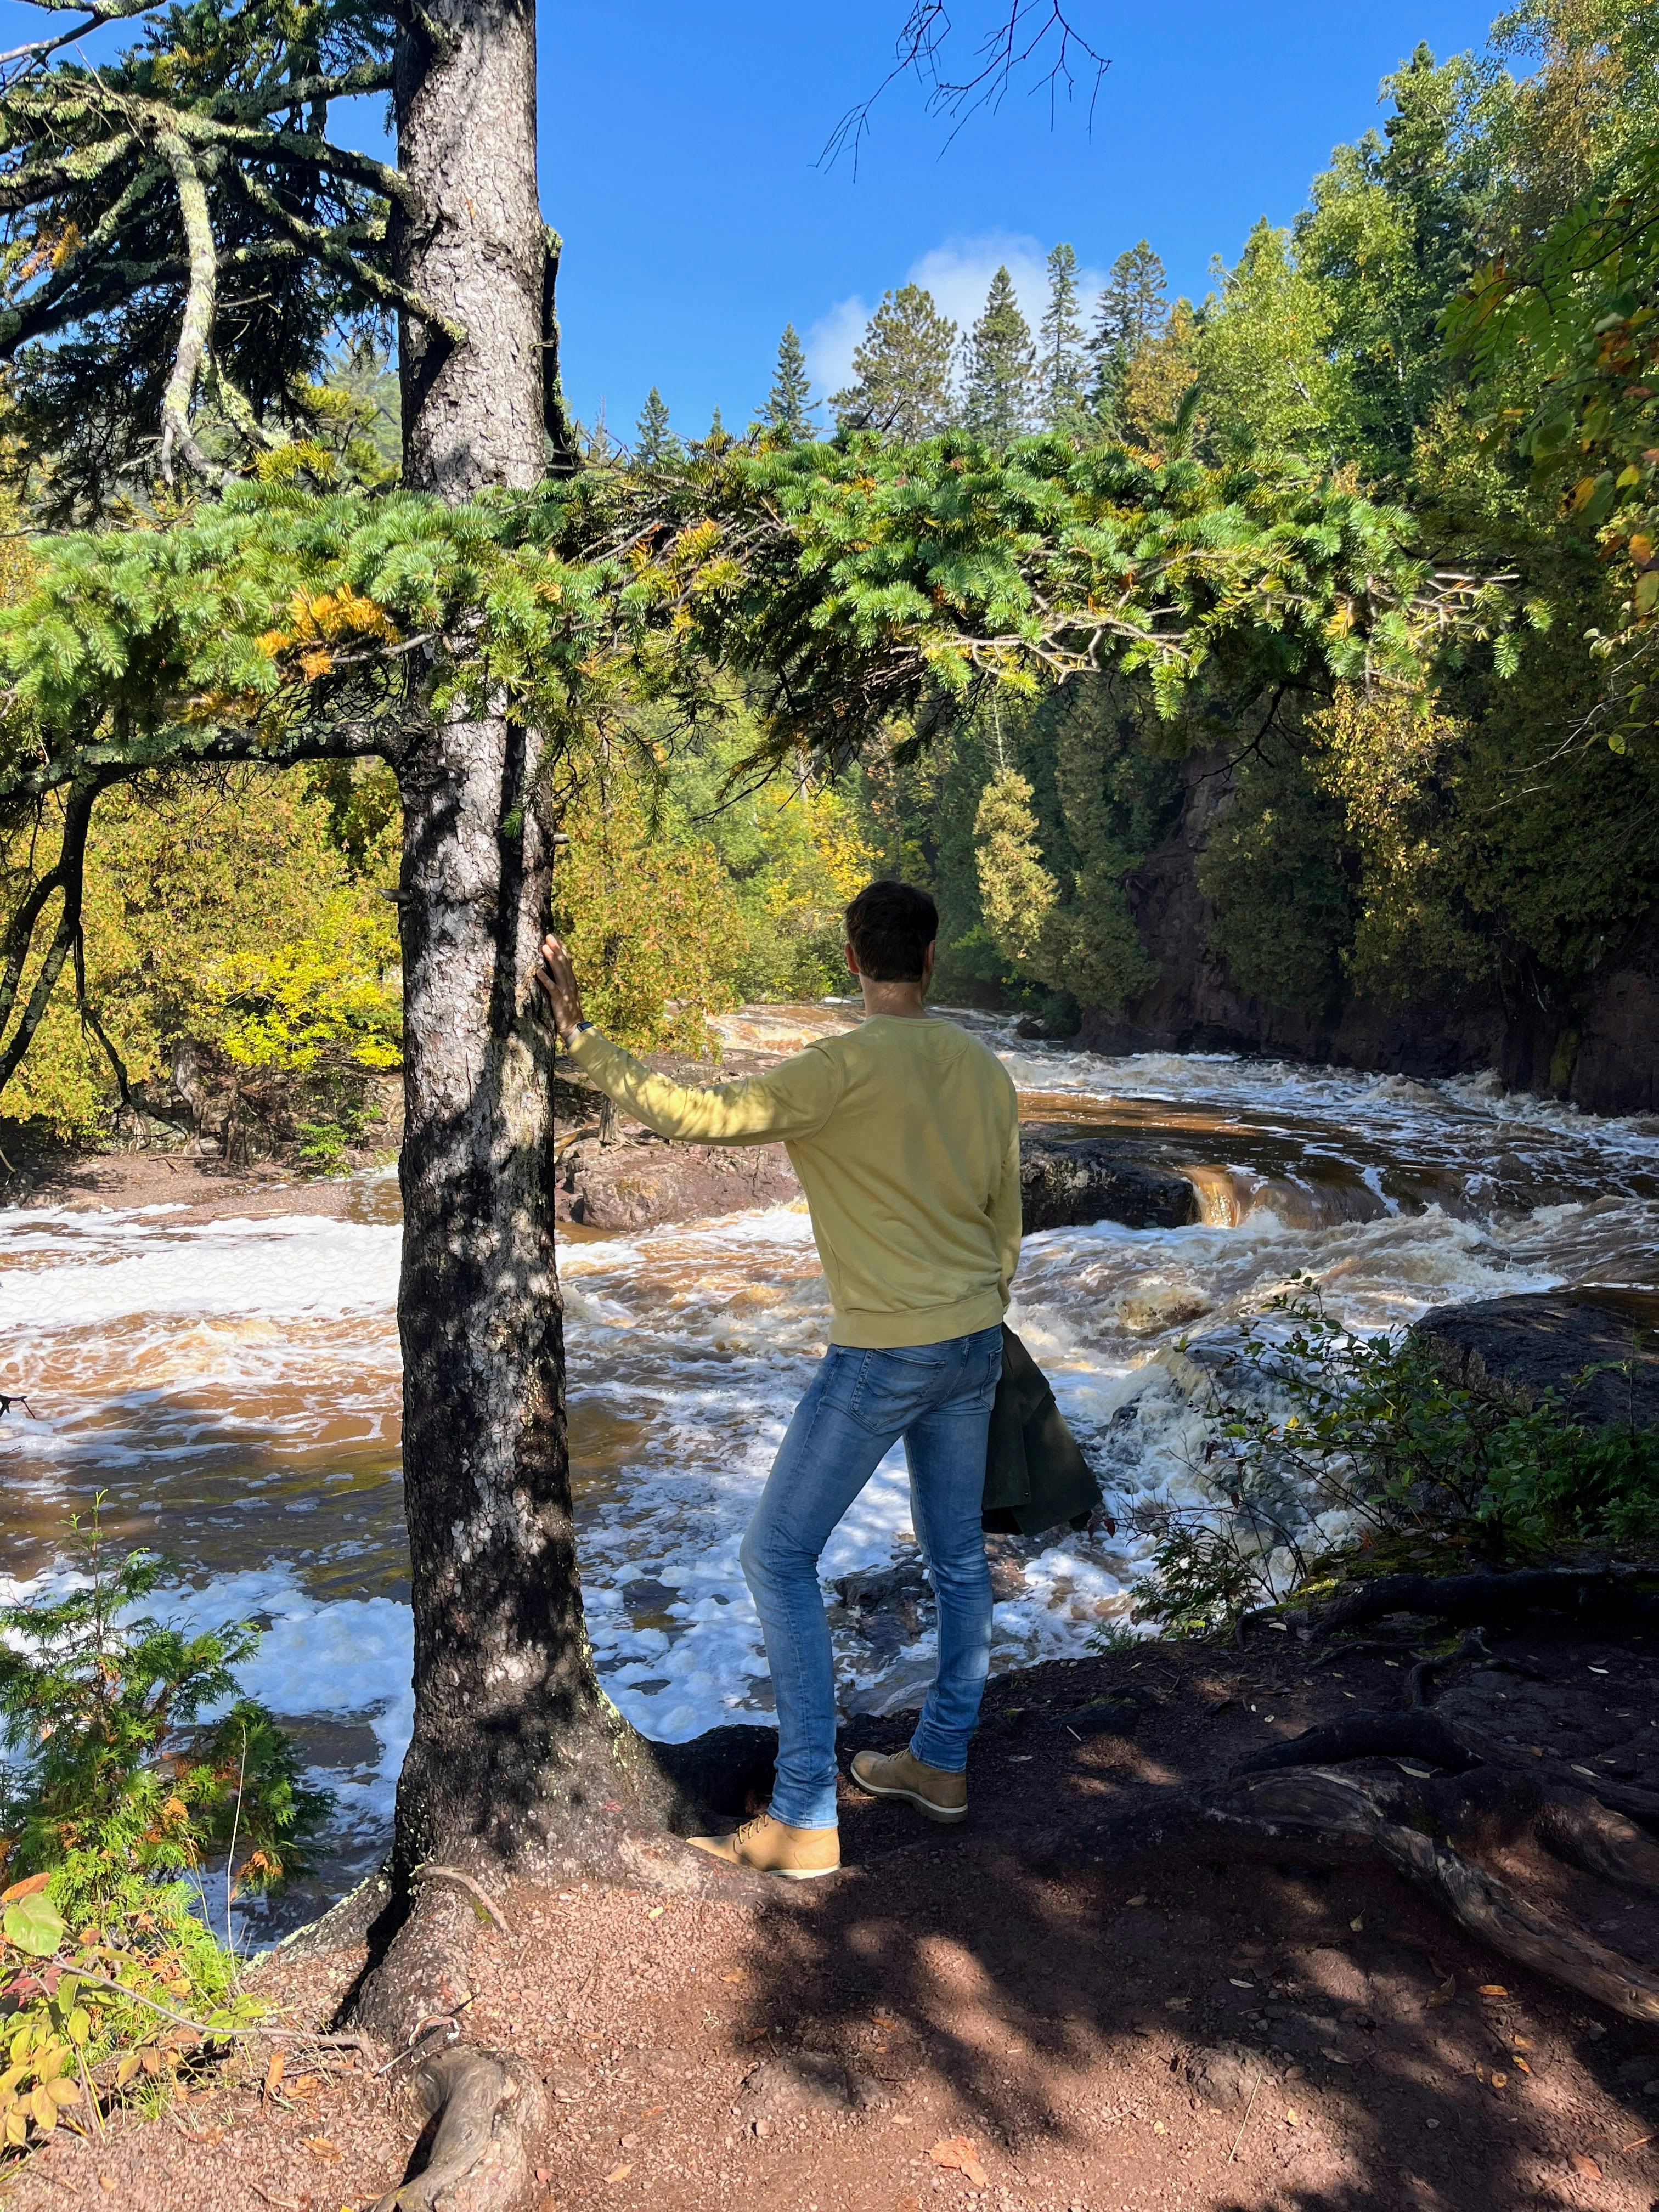 Connor stands next to a pine tree looking down onto the rushing and roaring river below